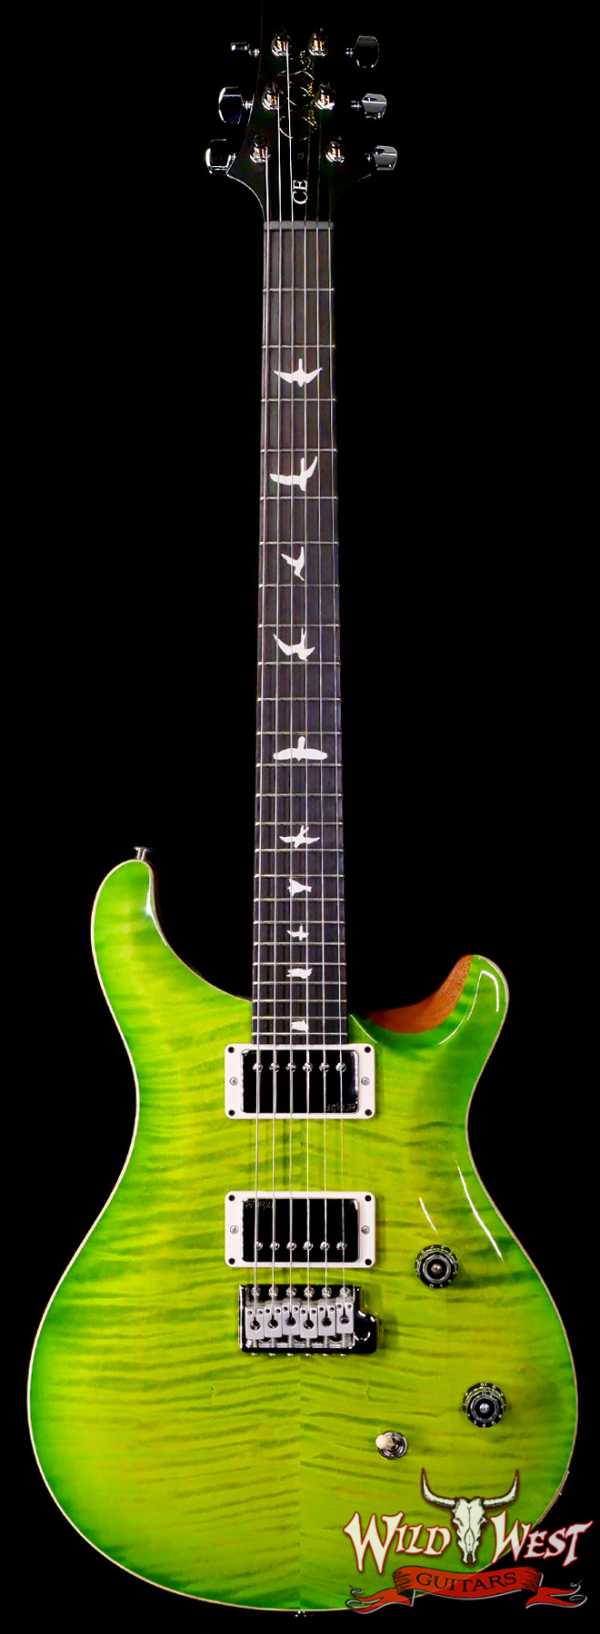 Paul Reed Smith PRS Wild West Guitars Special Run CE 24 Painted Black Neck 57/08 Covered Pickups Eriza Verde 7.65 LBS